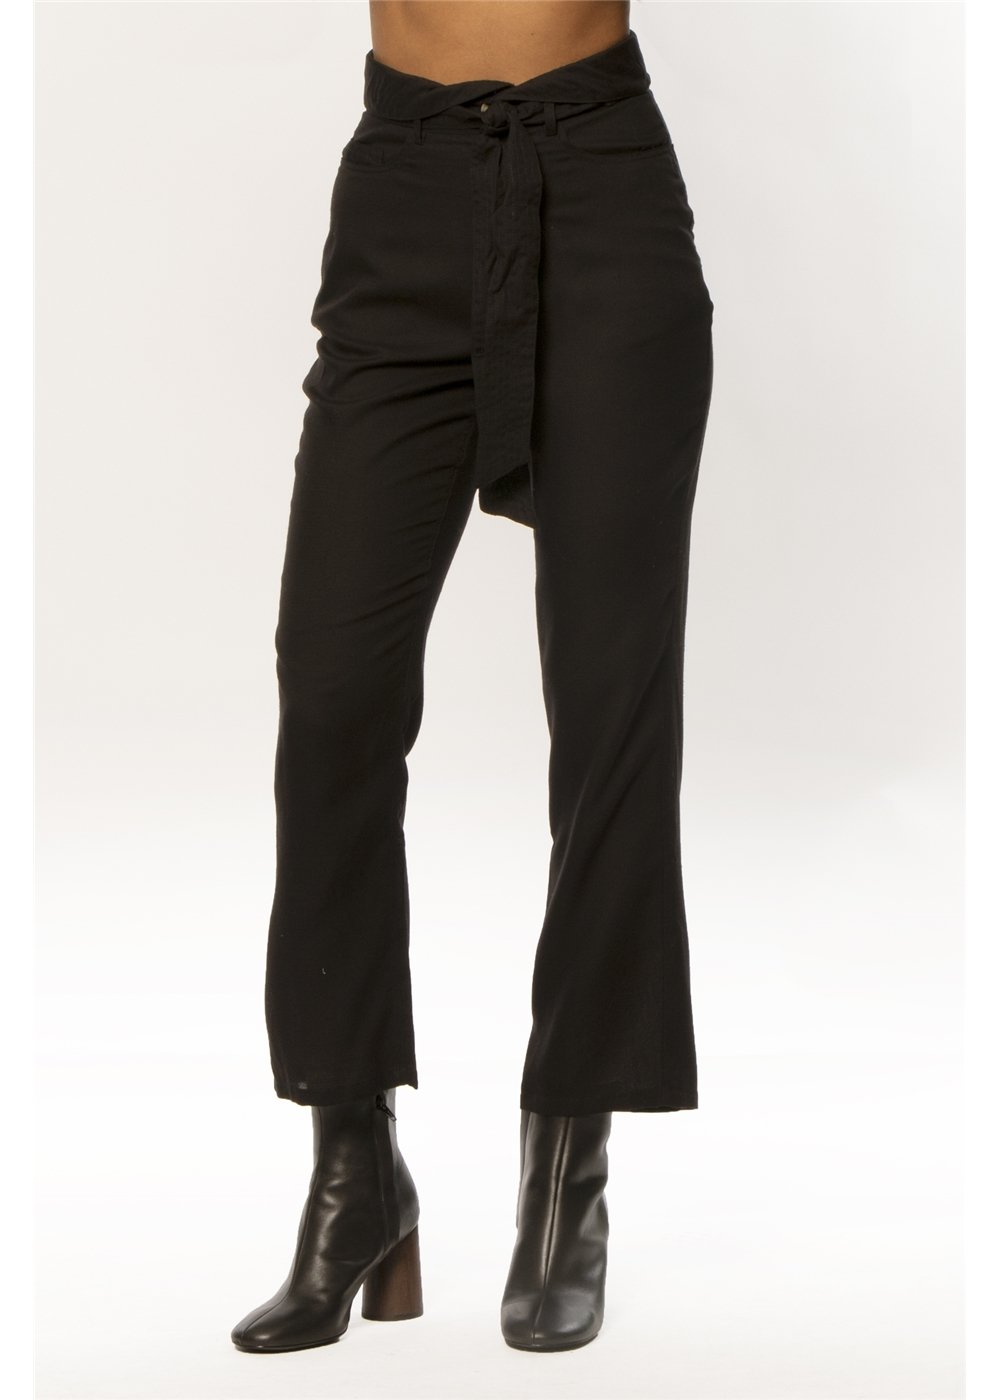 Amuse Society Women's Dolly Woven Pant in Black. Front View on Model.